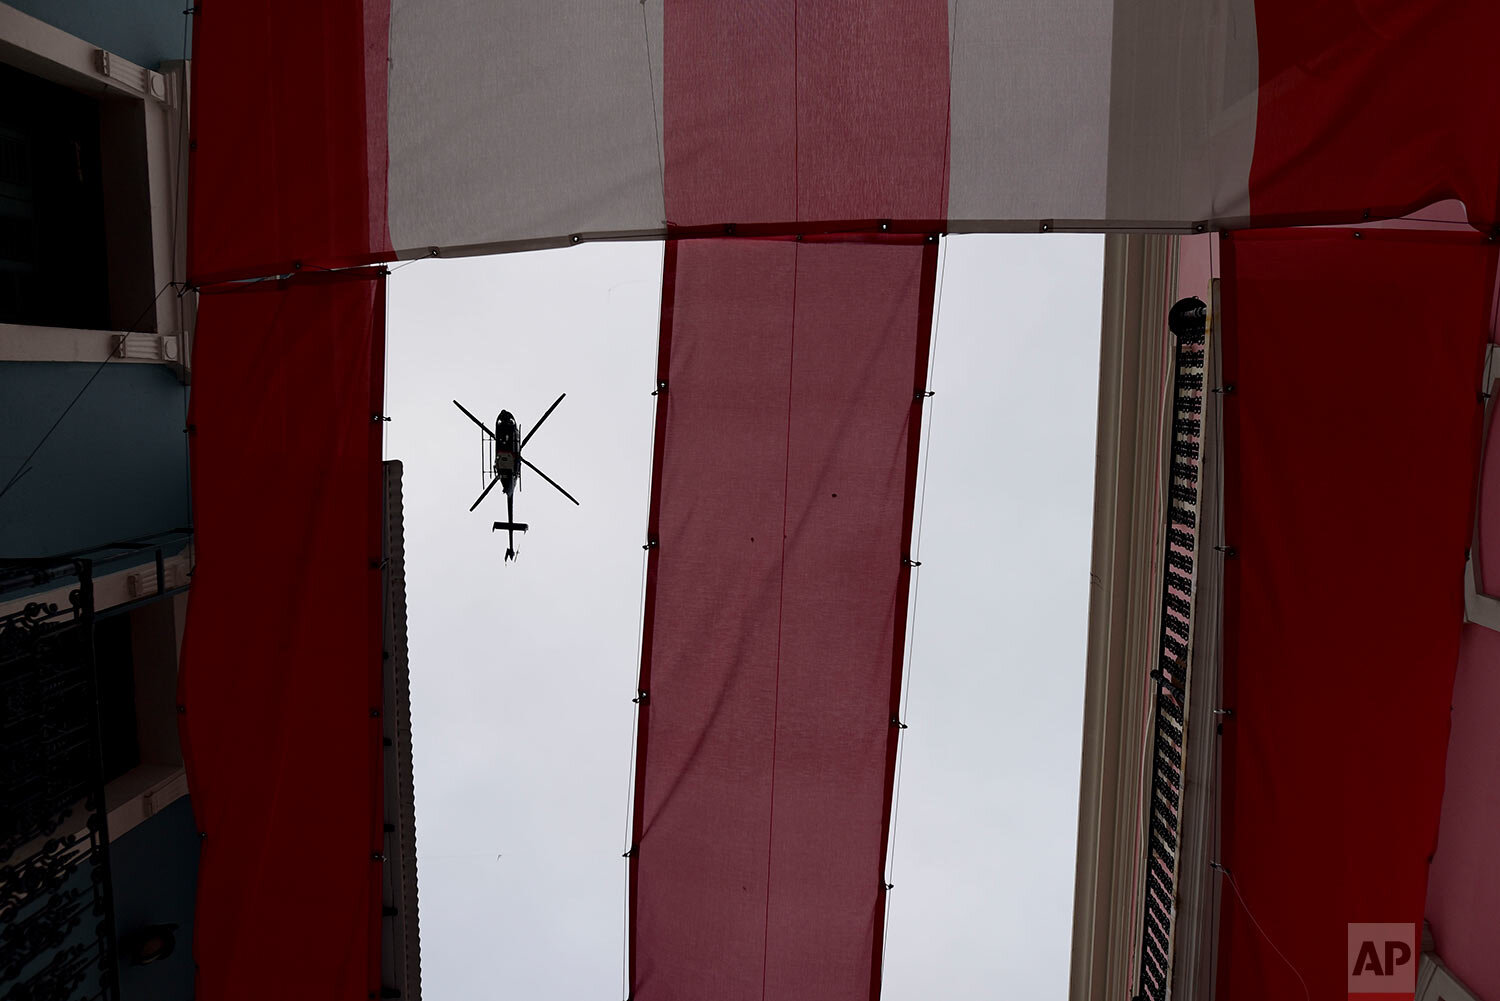  A police helicopter flies over protesters that were demanding the resignation of Governor Wanda Vazquez after the discovery of an old warehouse filled with unused emergency supplies, outside the executive mansion known has La Fortaleza, in Old San J